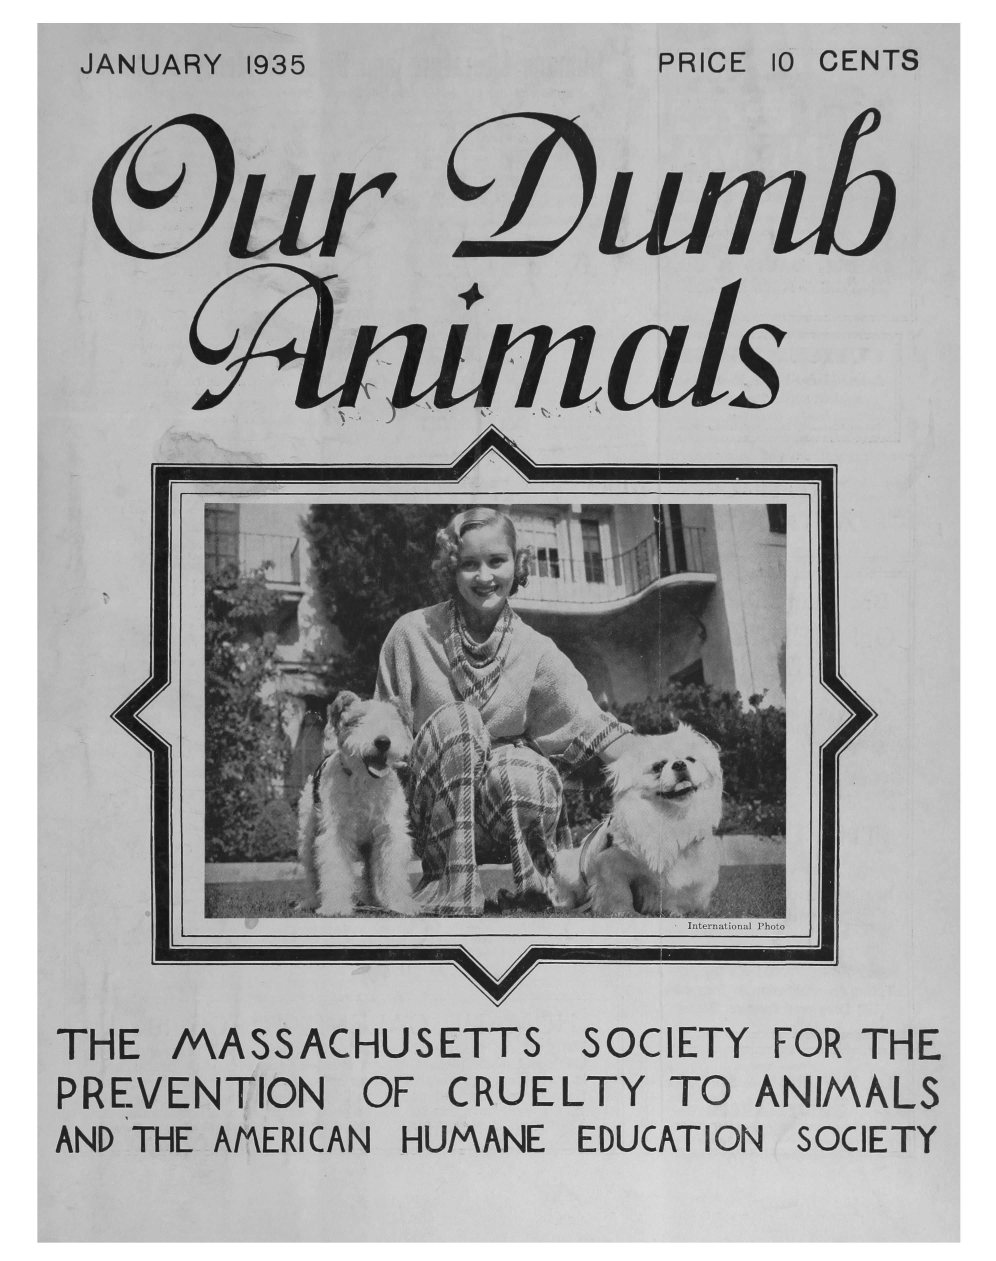 handle is hein.journals/animals68 and id is 1 raw text is: PRICE 10 CENTS)u+               alSI~1I-LL                    VITHE  MASSACHUSETTS   SOCIETY FOR THEPREVENTION  OF  CRUELTY  TO ANIMALSAND THE AMERICAN HUMANE EDUCATION SOCIETY'LI  IIv4f2l,~ a  -JANUARY 1935IIn rna(lna) Phwo